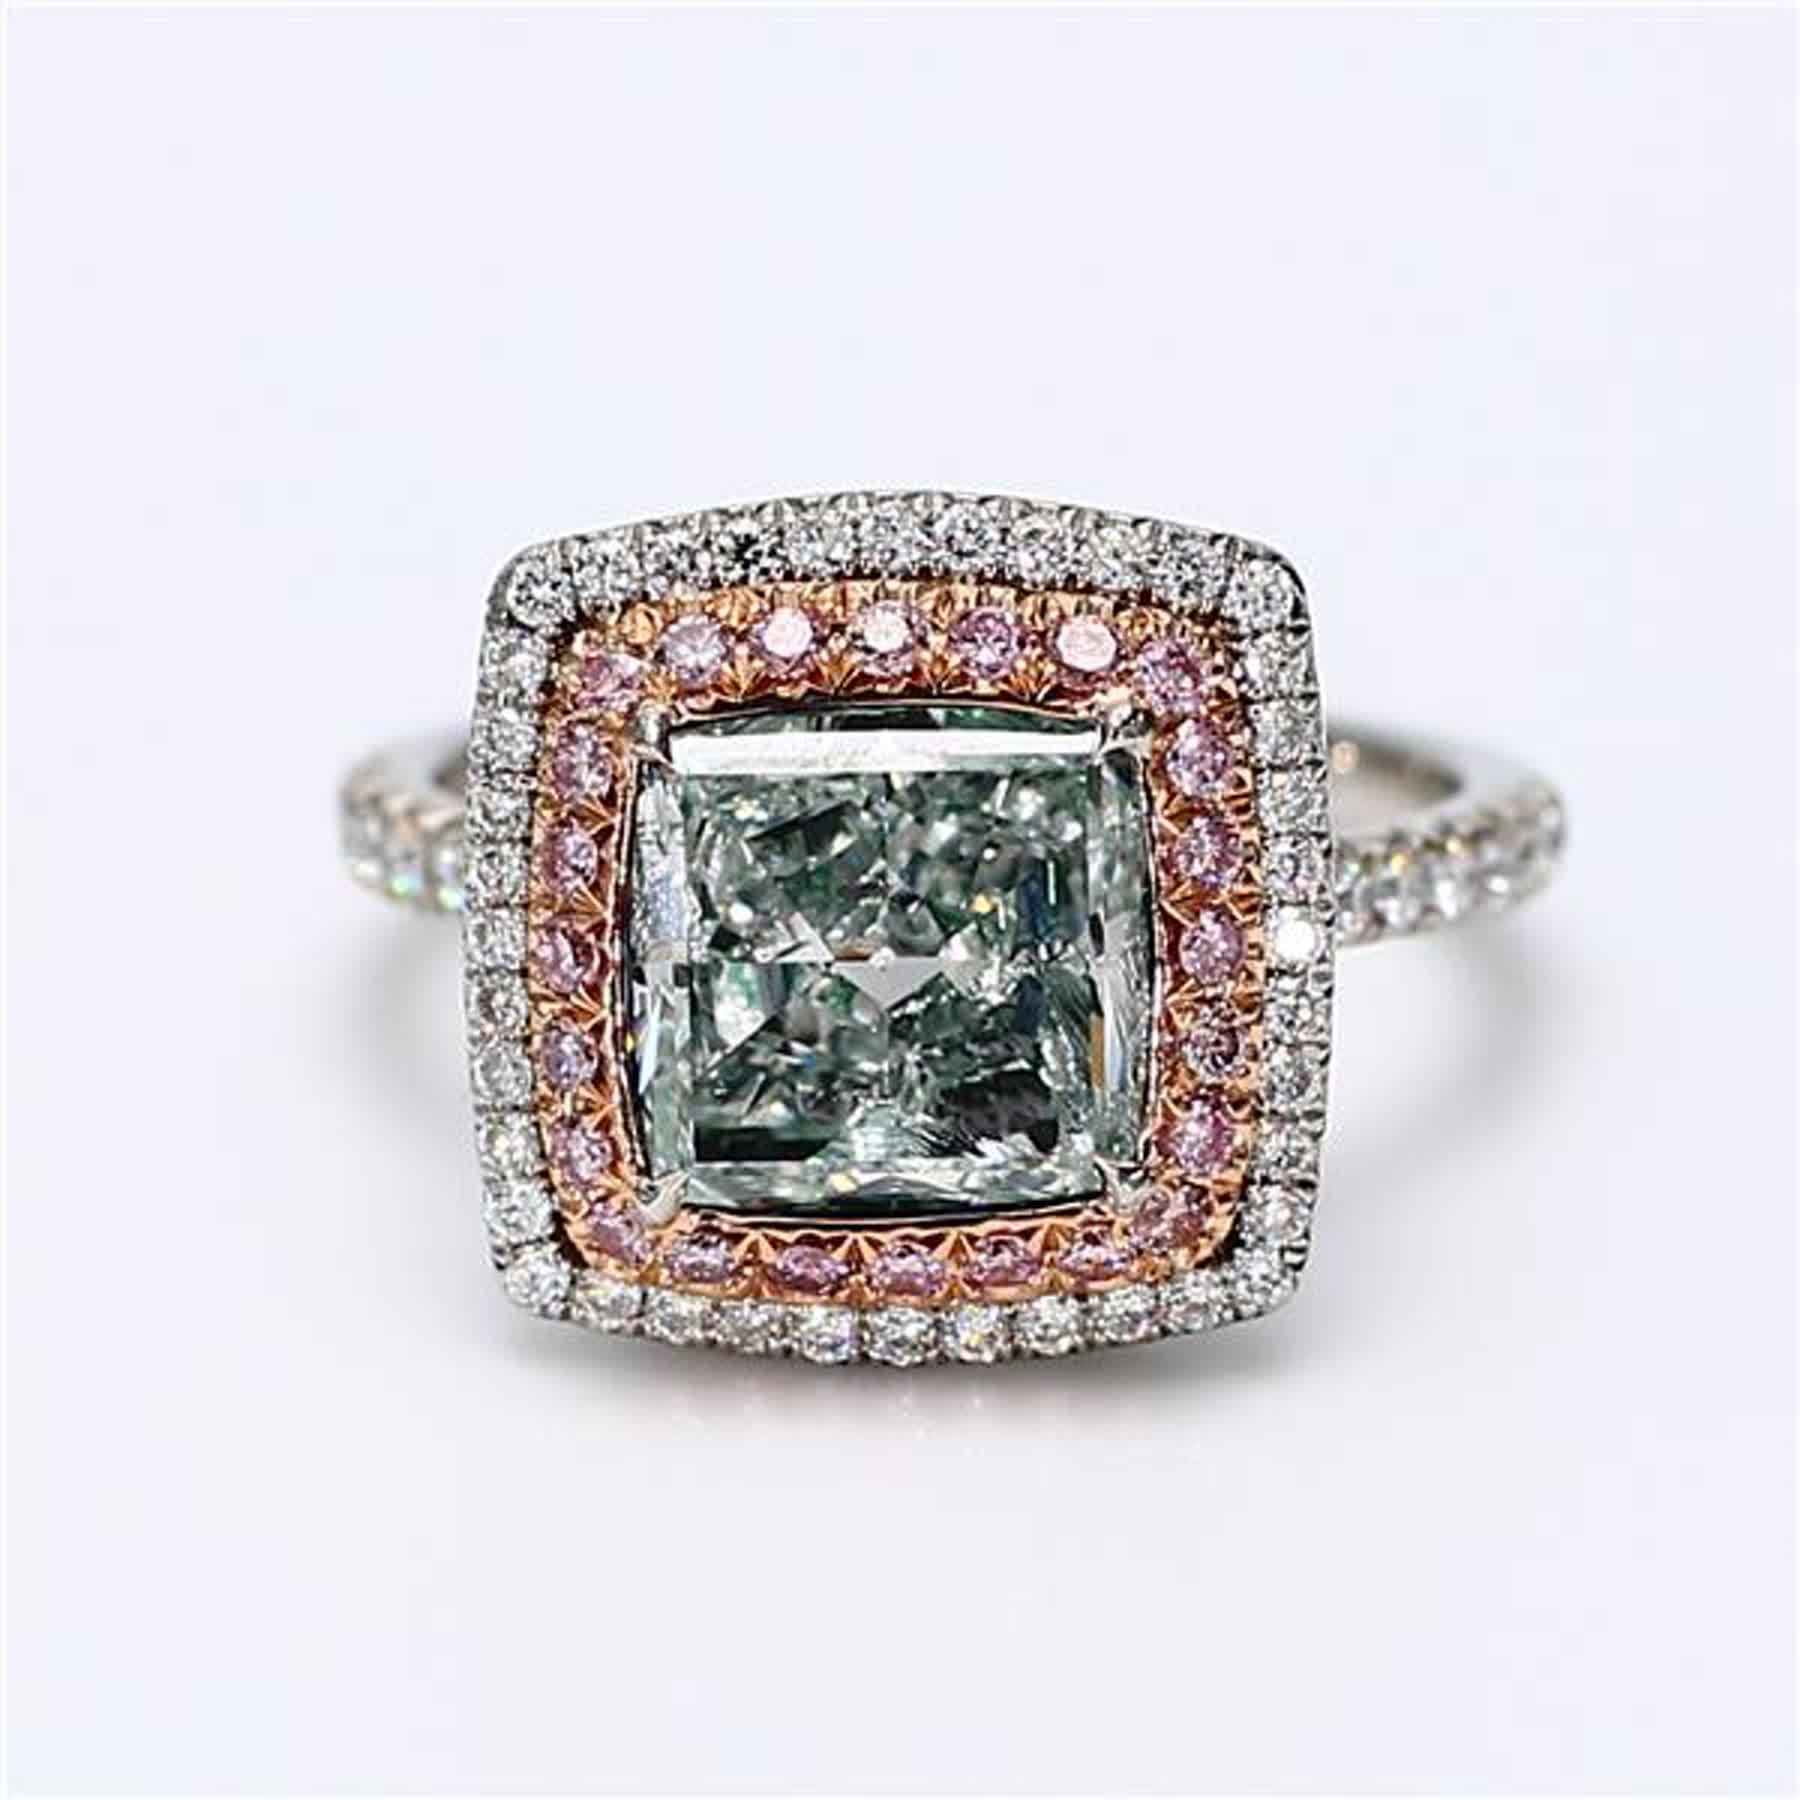 RareGemWorld's classic GIA certified diamond ring. Mounted in a beautiful 18K Rose and White Gold setting with a natural cushion cut green diamond. The green diamond is surrounded by round natural pink diamond melee and round natural white diamond